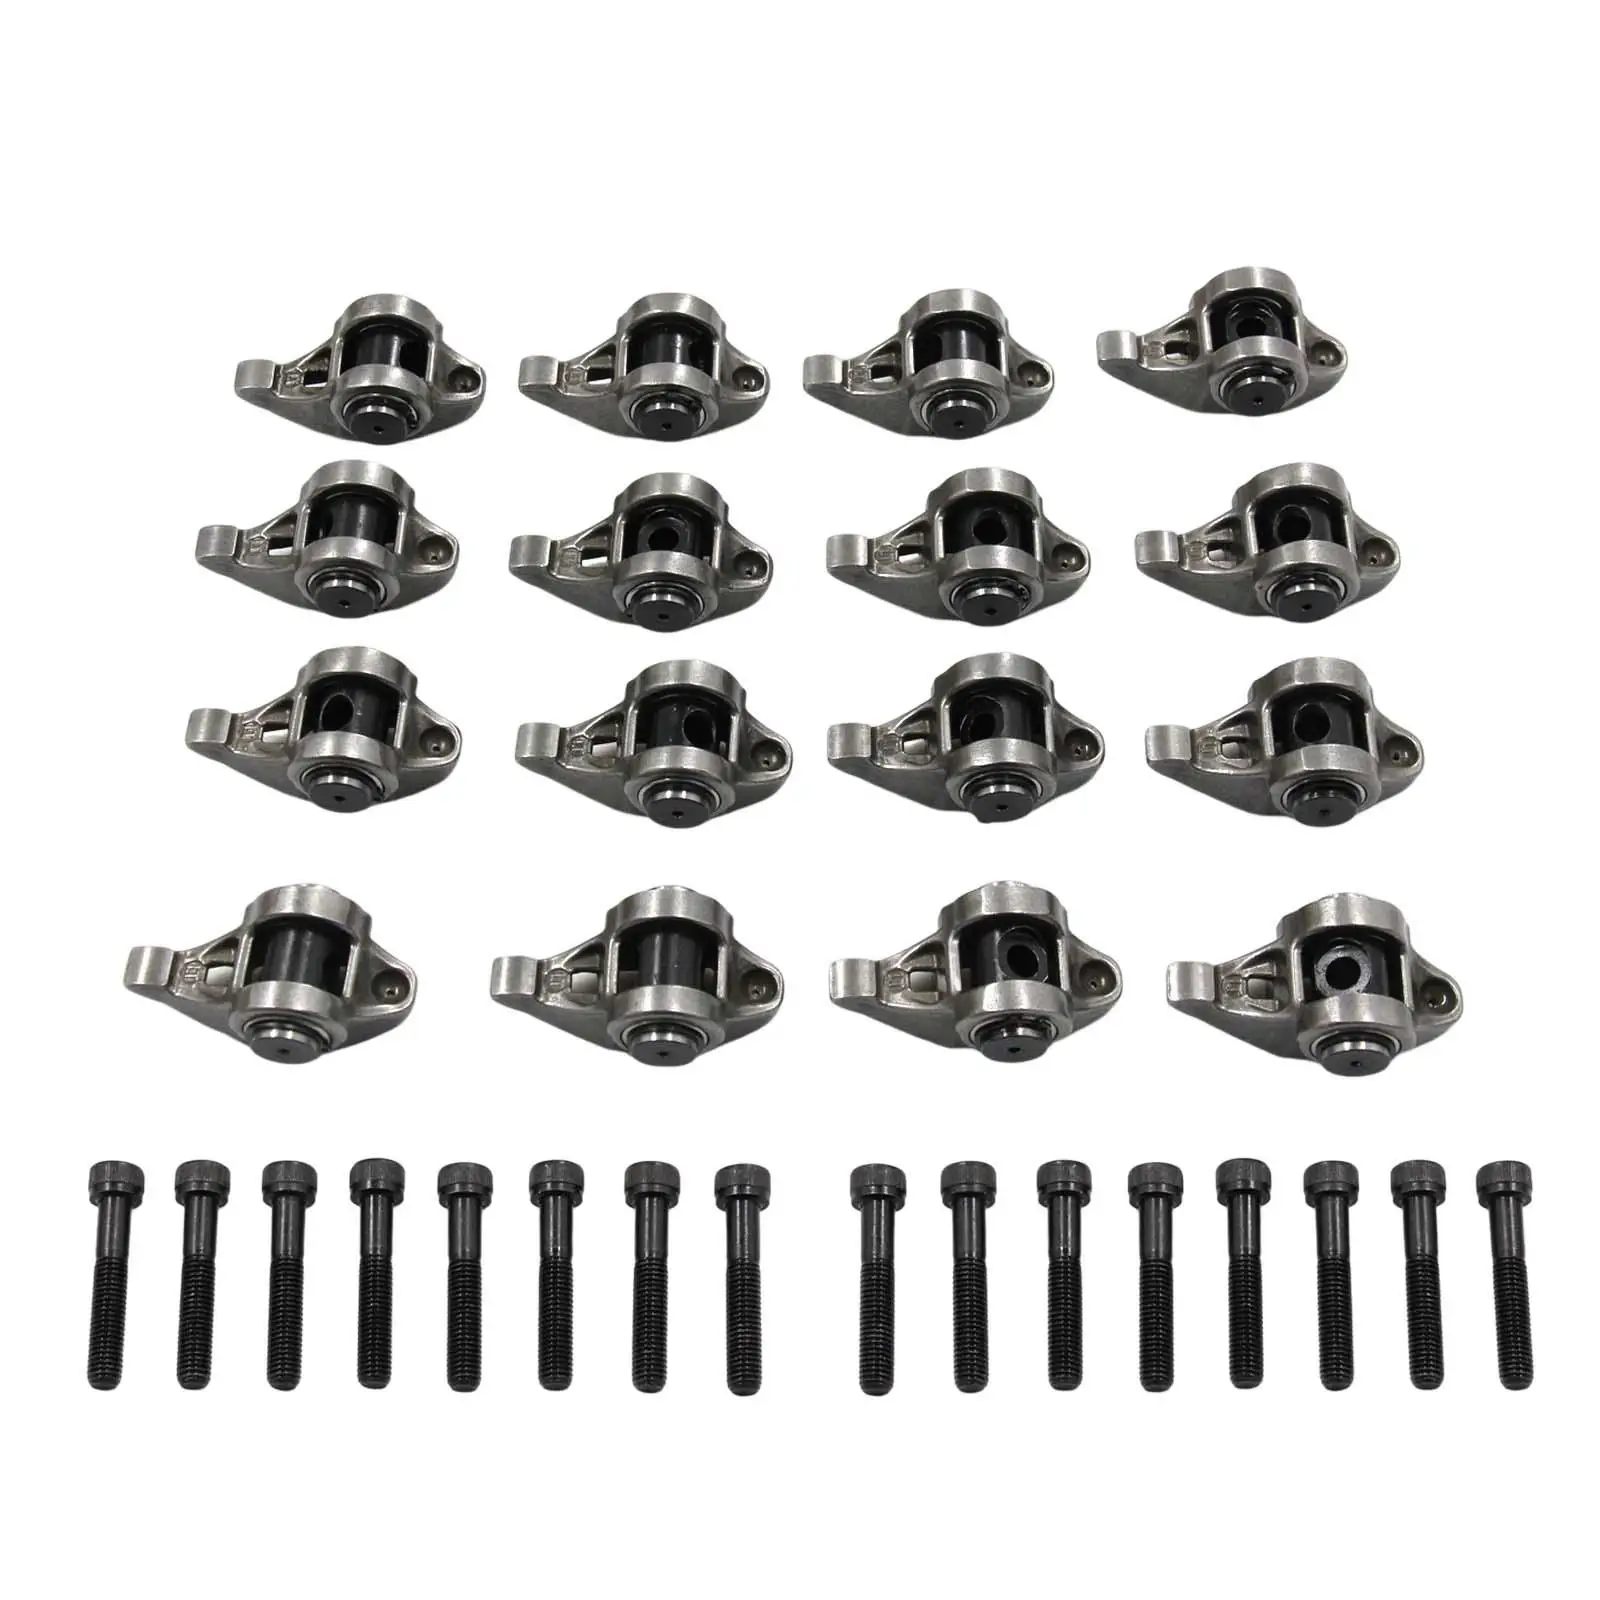 

16 Pieces Rocker Arms and Bolts with Trunion Kit Installed 10214664 Replace Steel for Chevrolet LS1 LS2 LS6 LY5 LY6 LM7 LM4